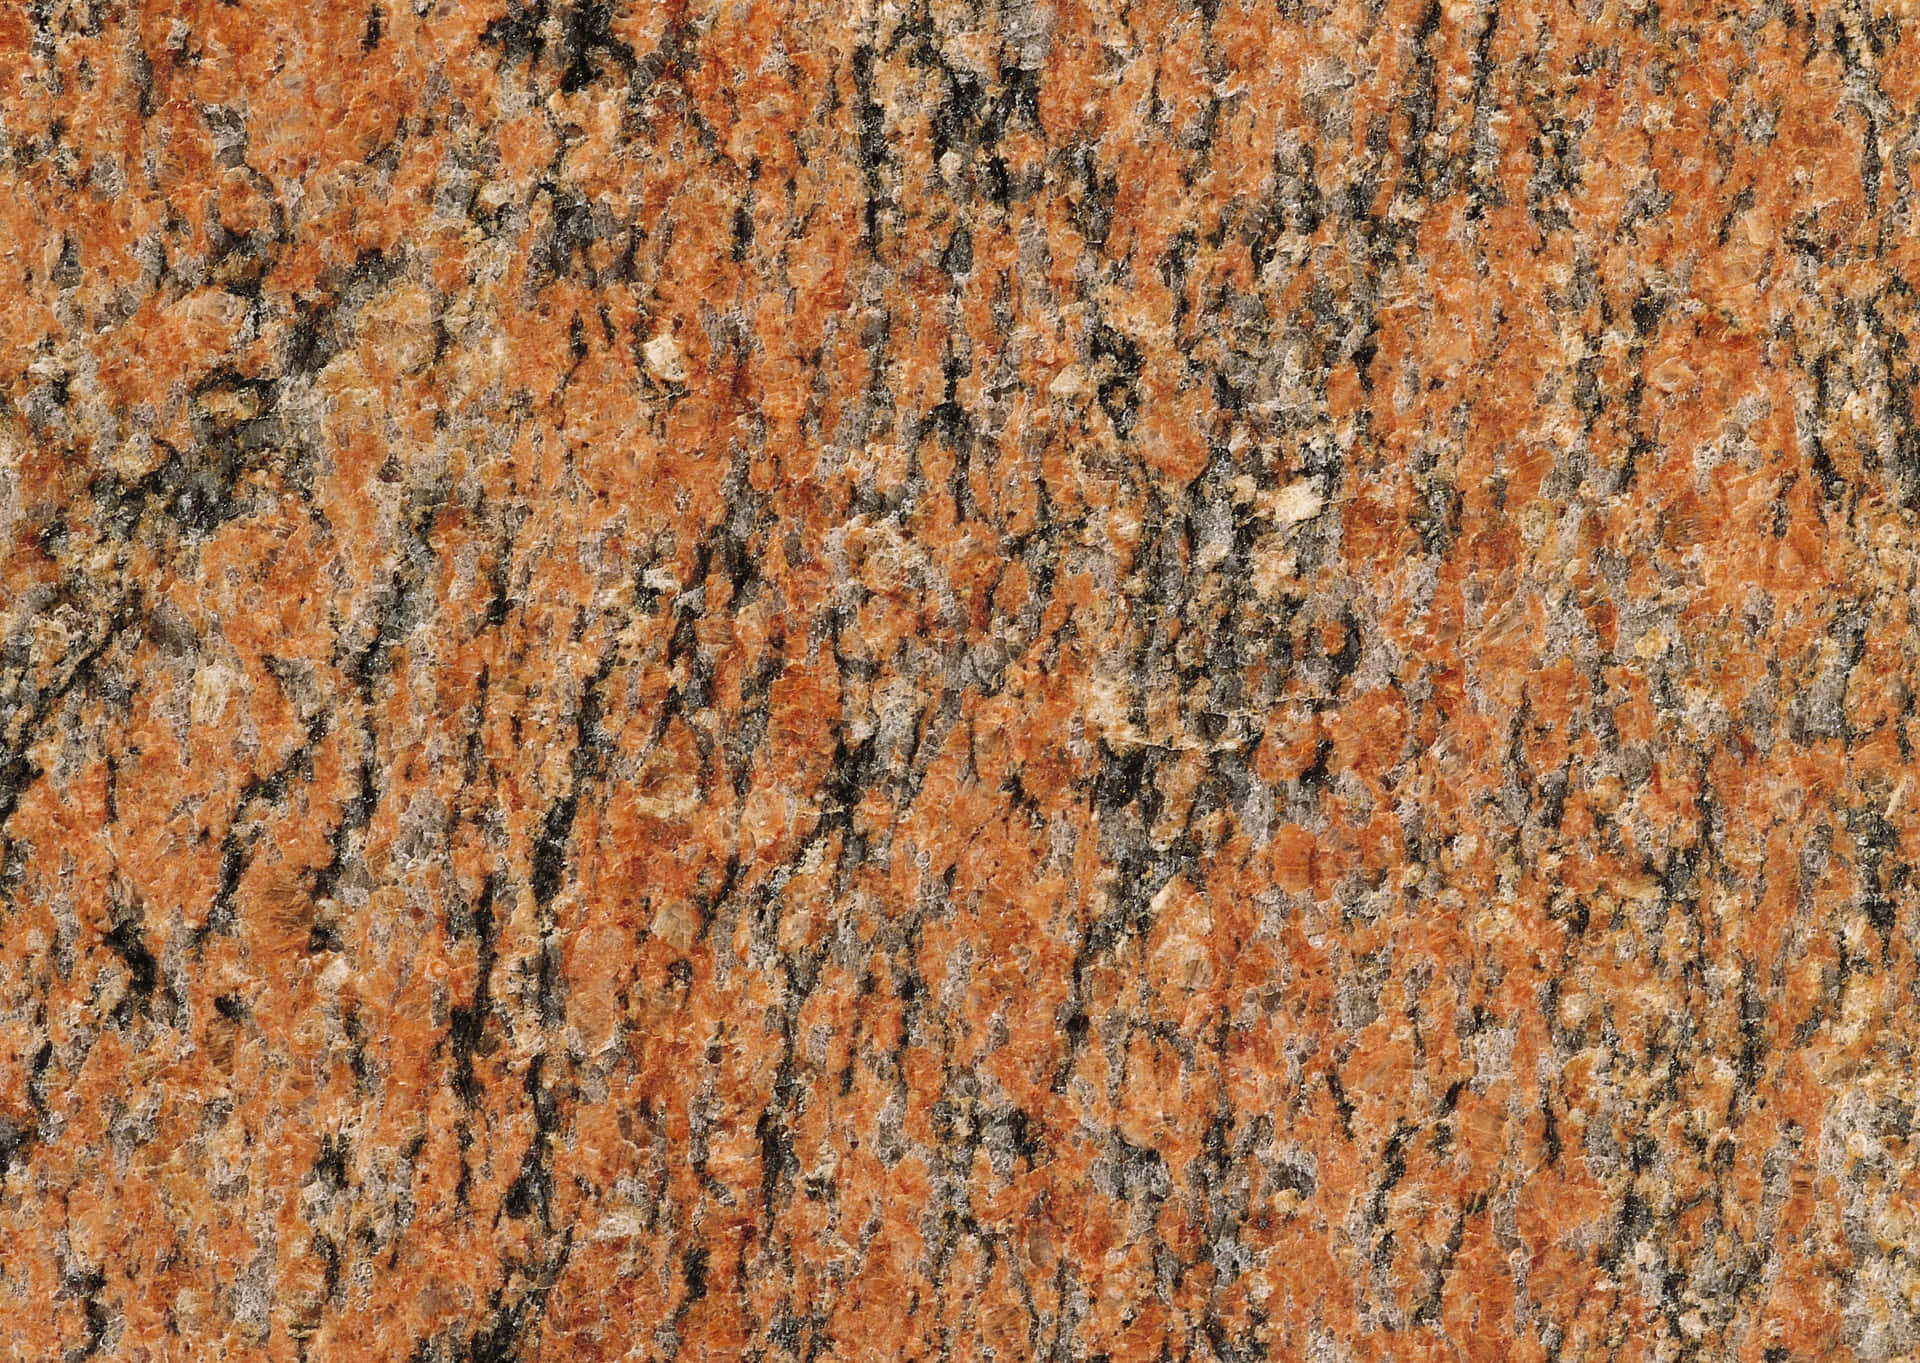 Granite background featuring an elegant and intricate pattern